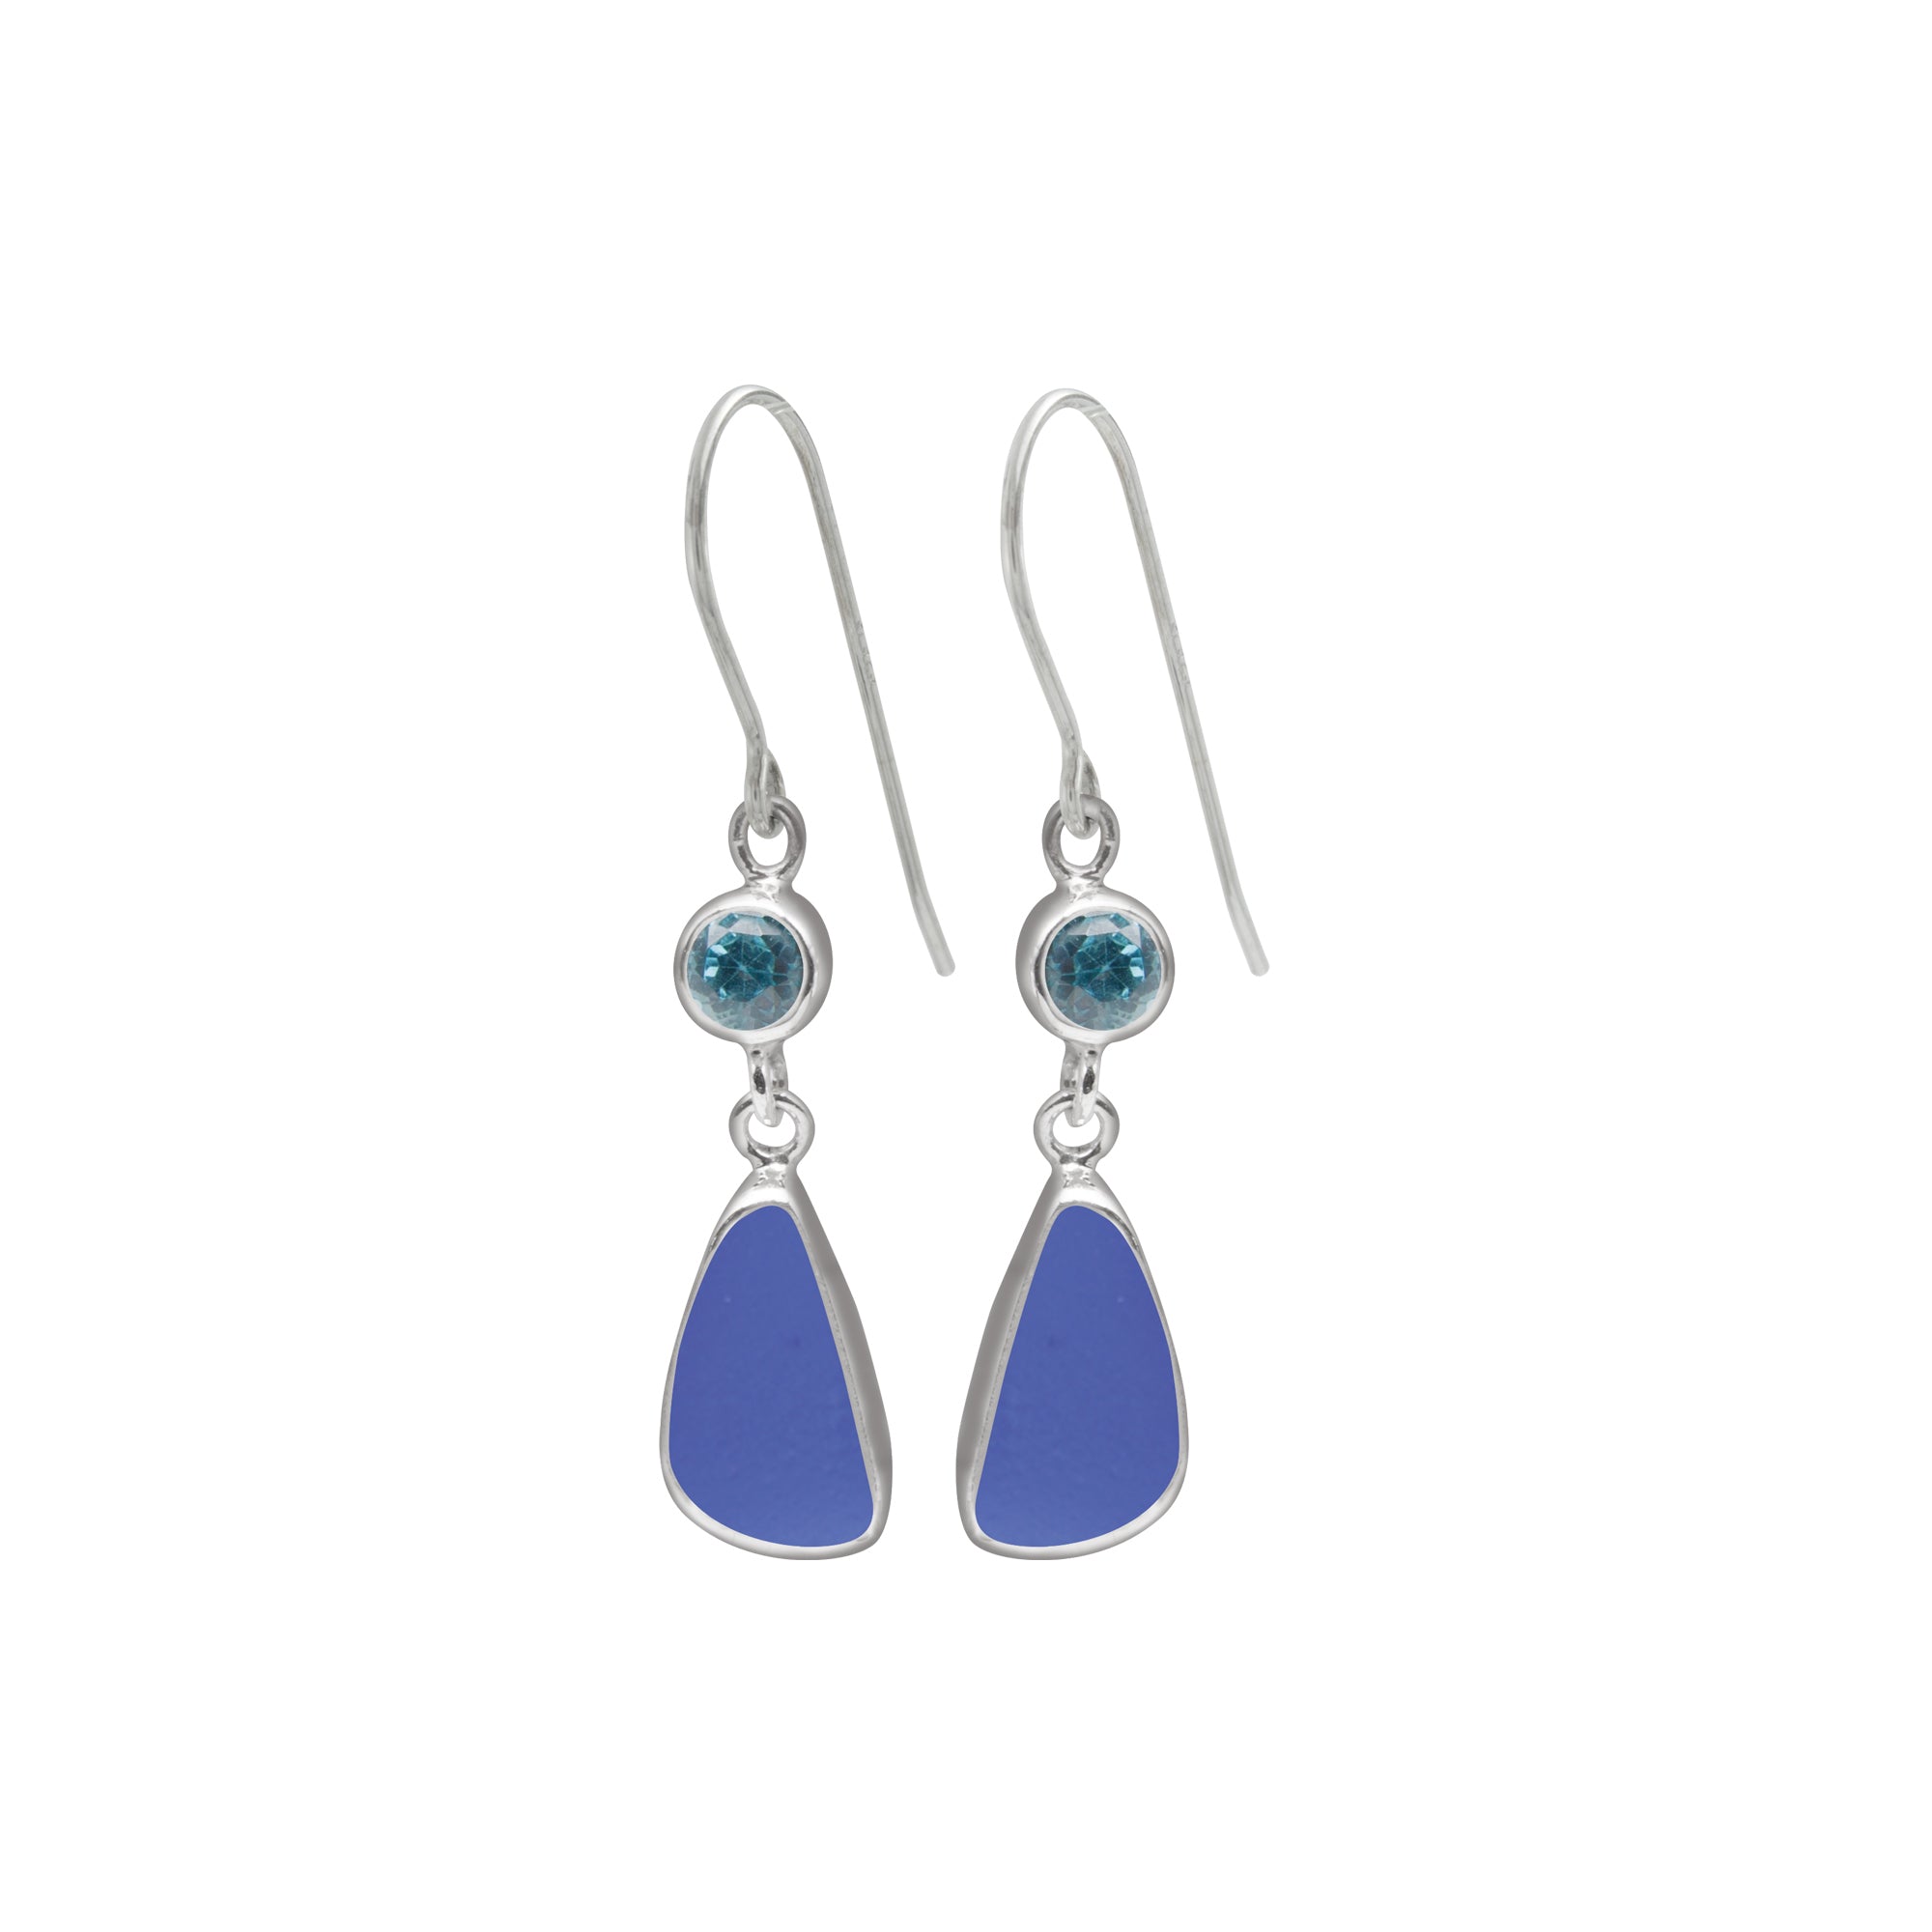 Sterling Silver Earring With Blue Topaz And Sea Glass Drop